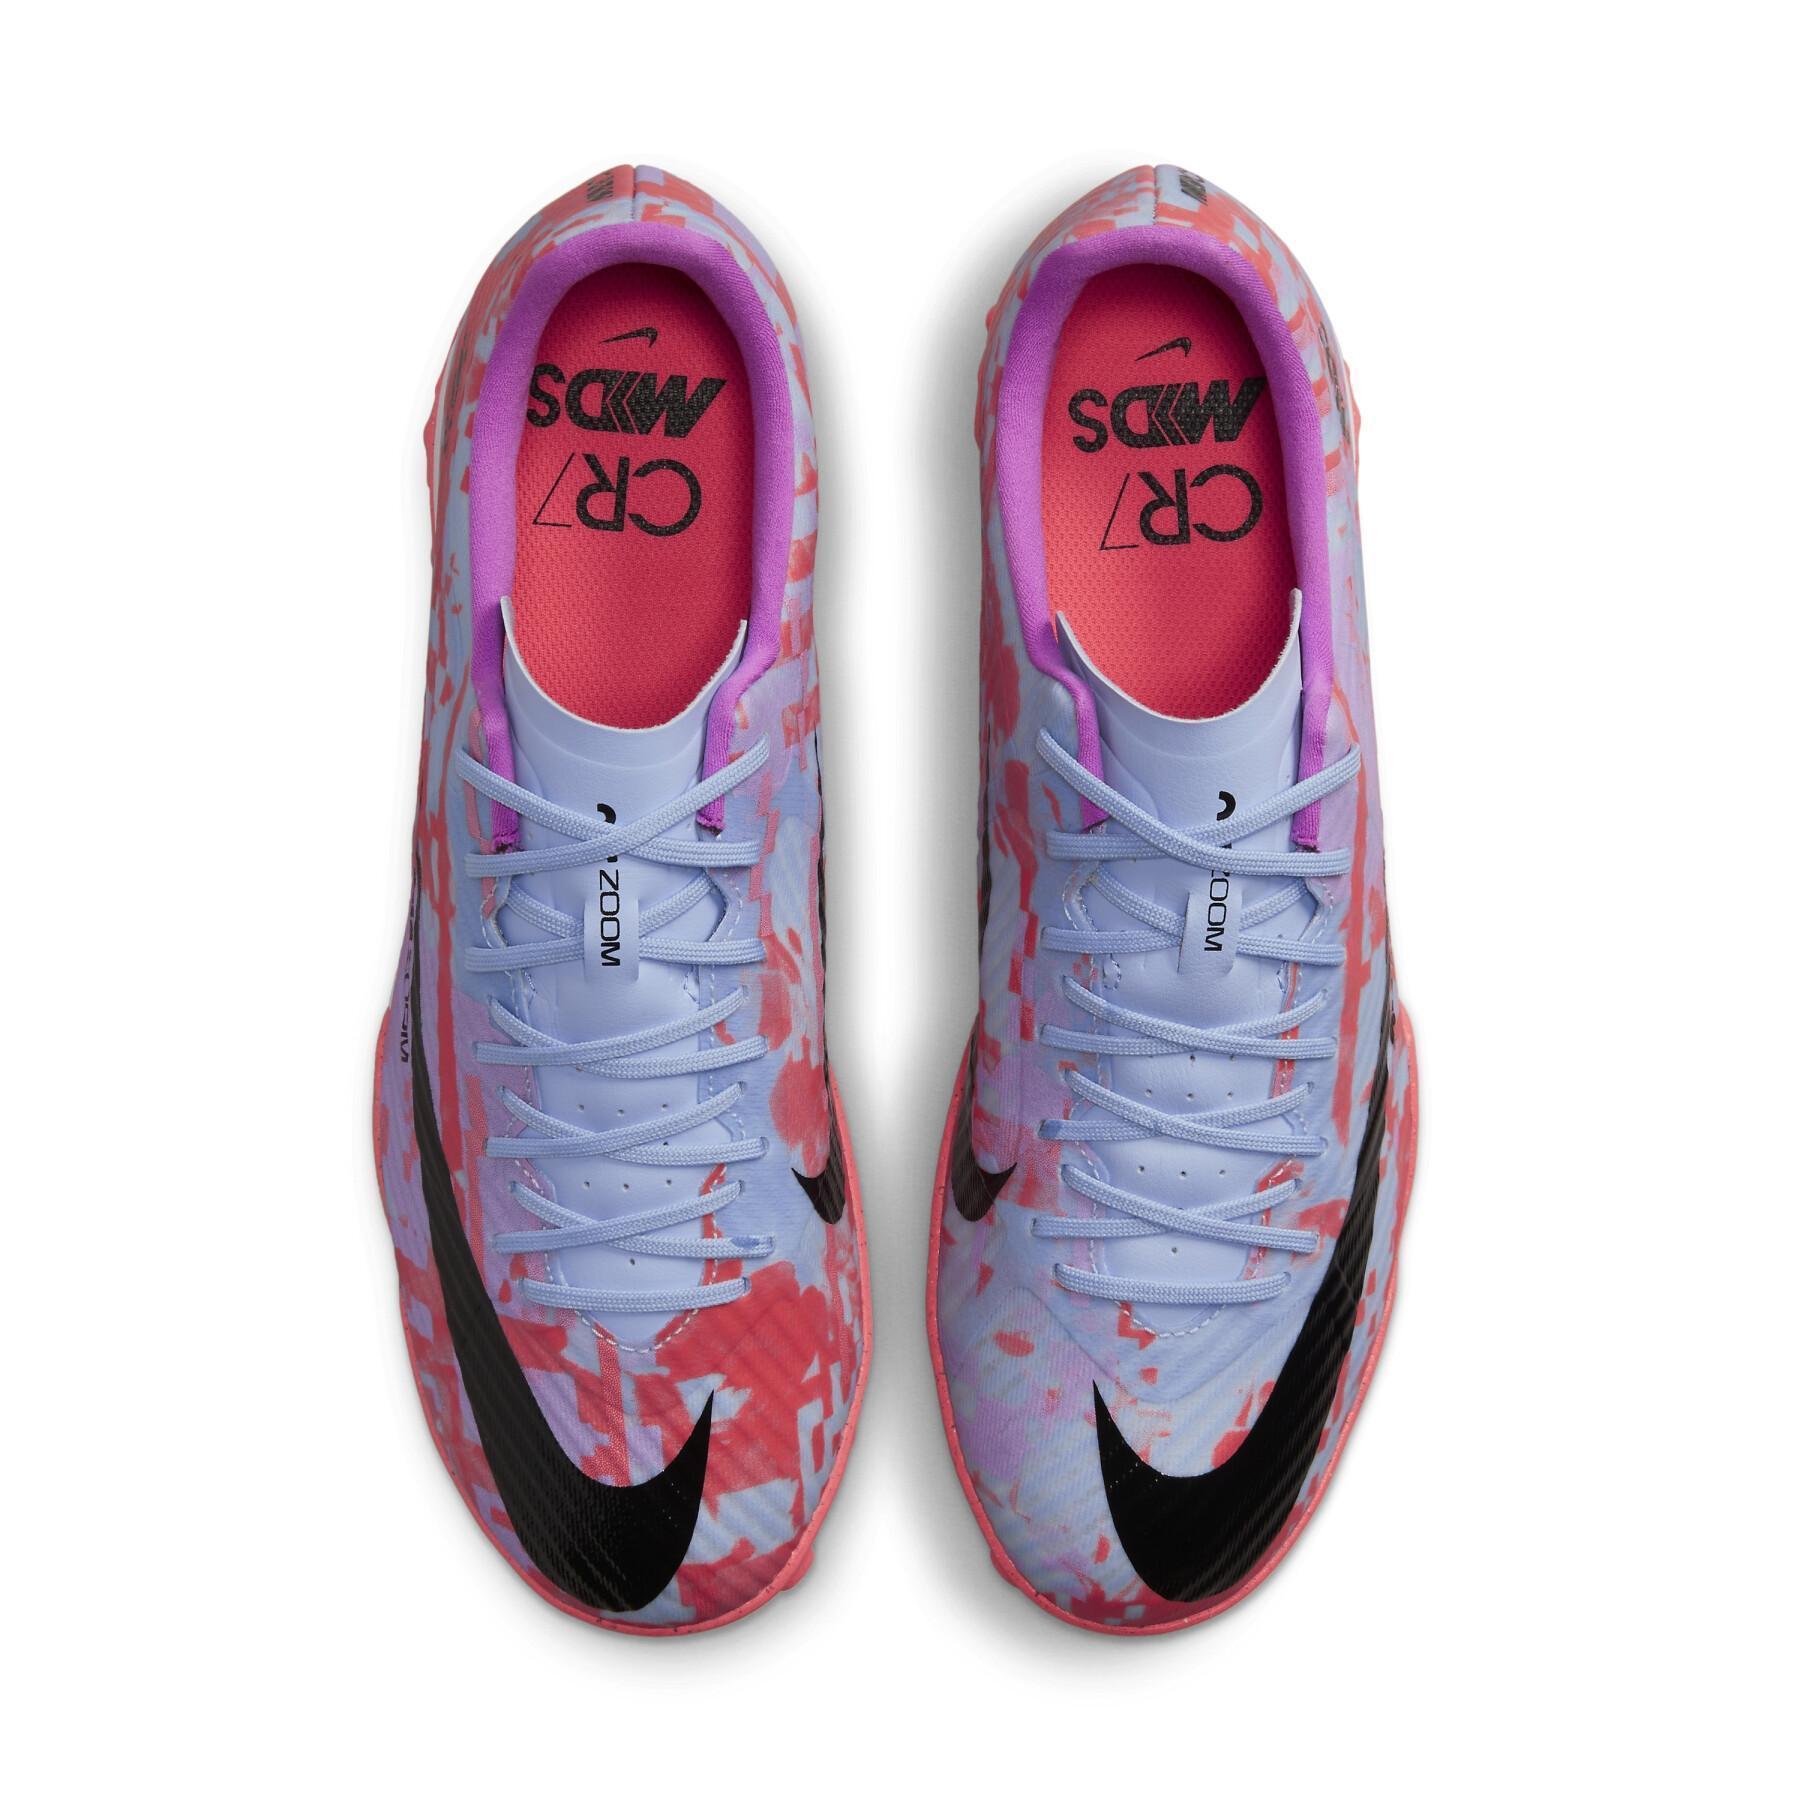 Soccer shoes Nike Zoom Vapor 15 Academy MDS TF